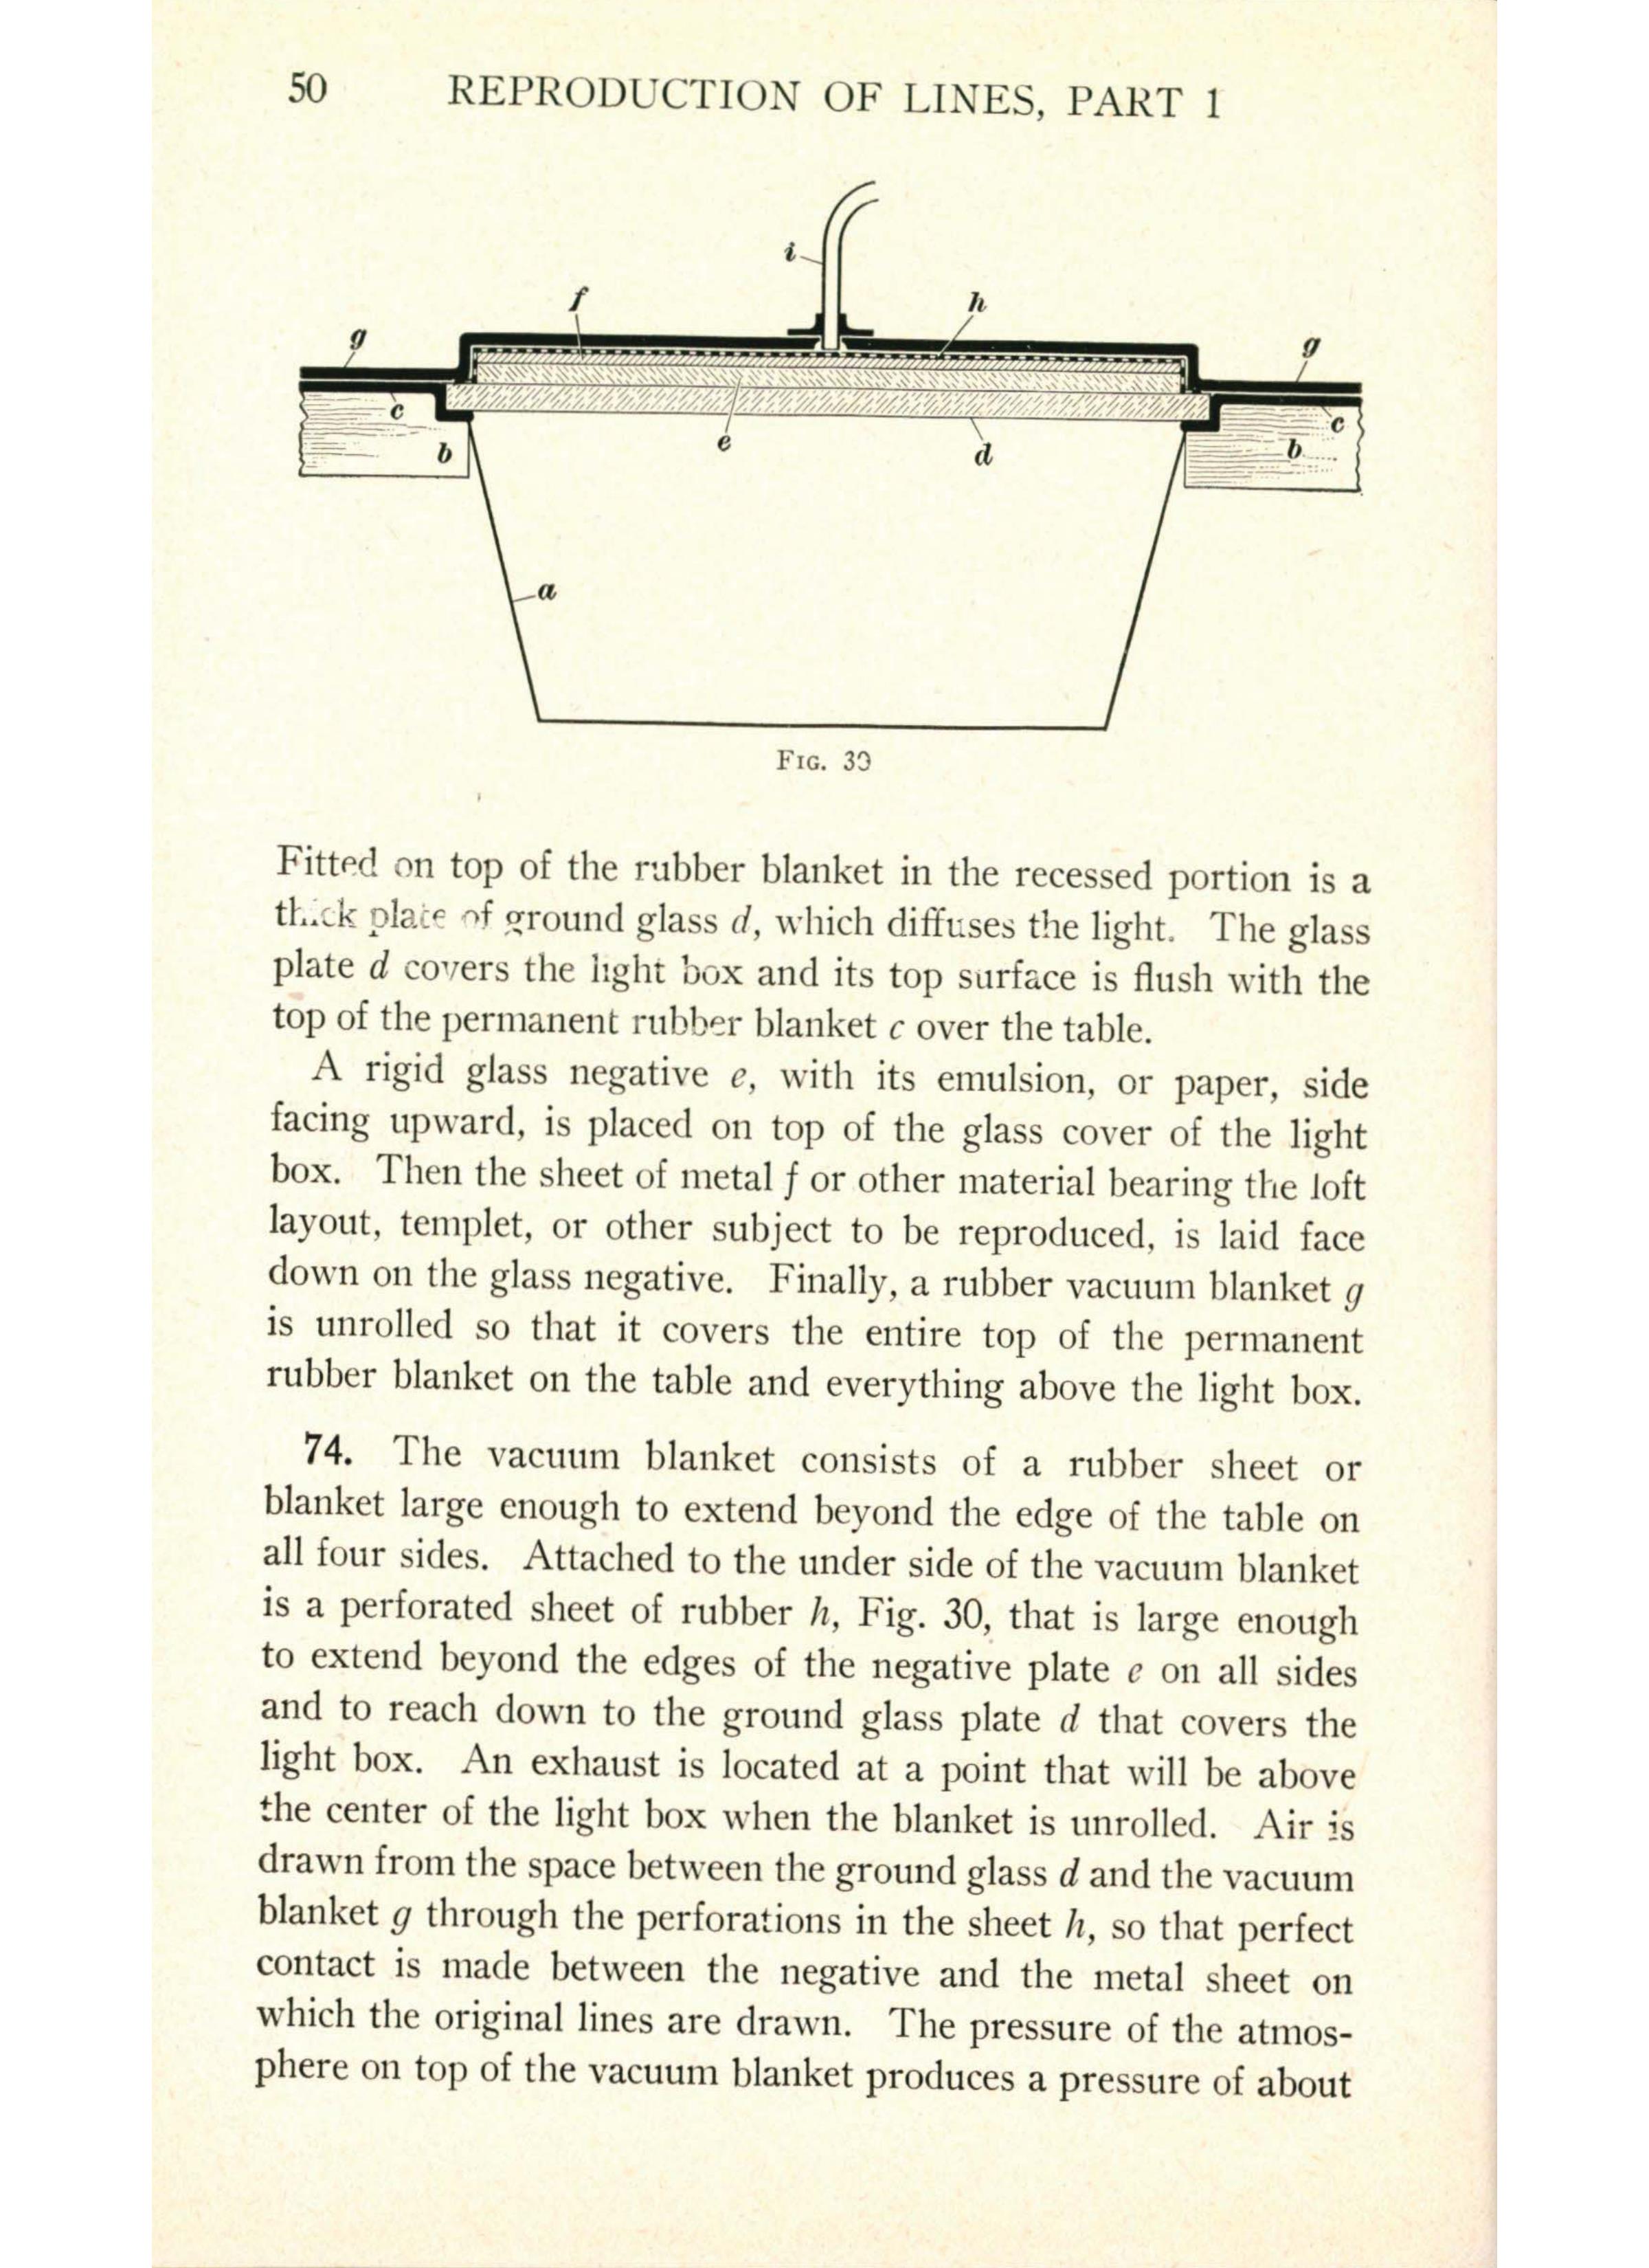 Sample page 52 from AirCorps Library document: Templets and Layout - Reproduction of Lines Part 1 - Bureau of Aeronautics